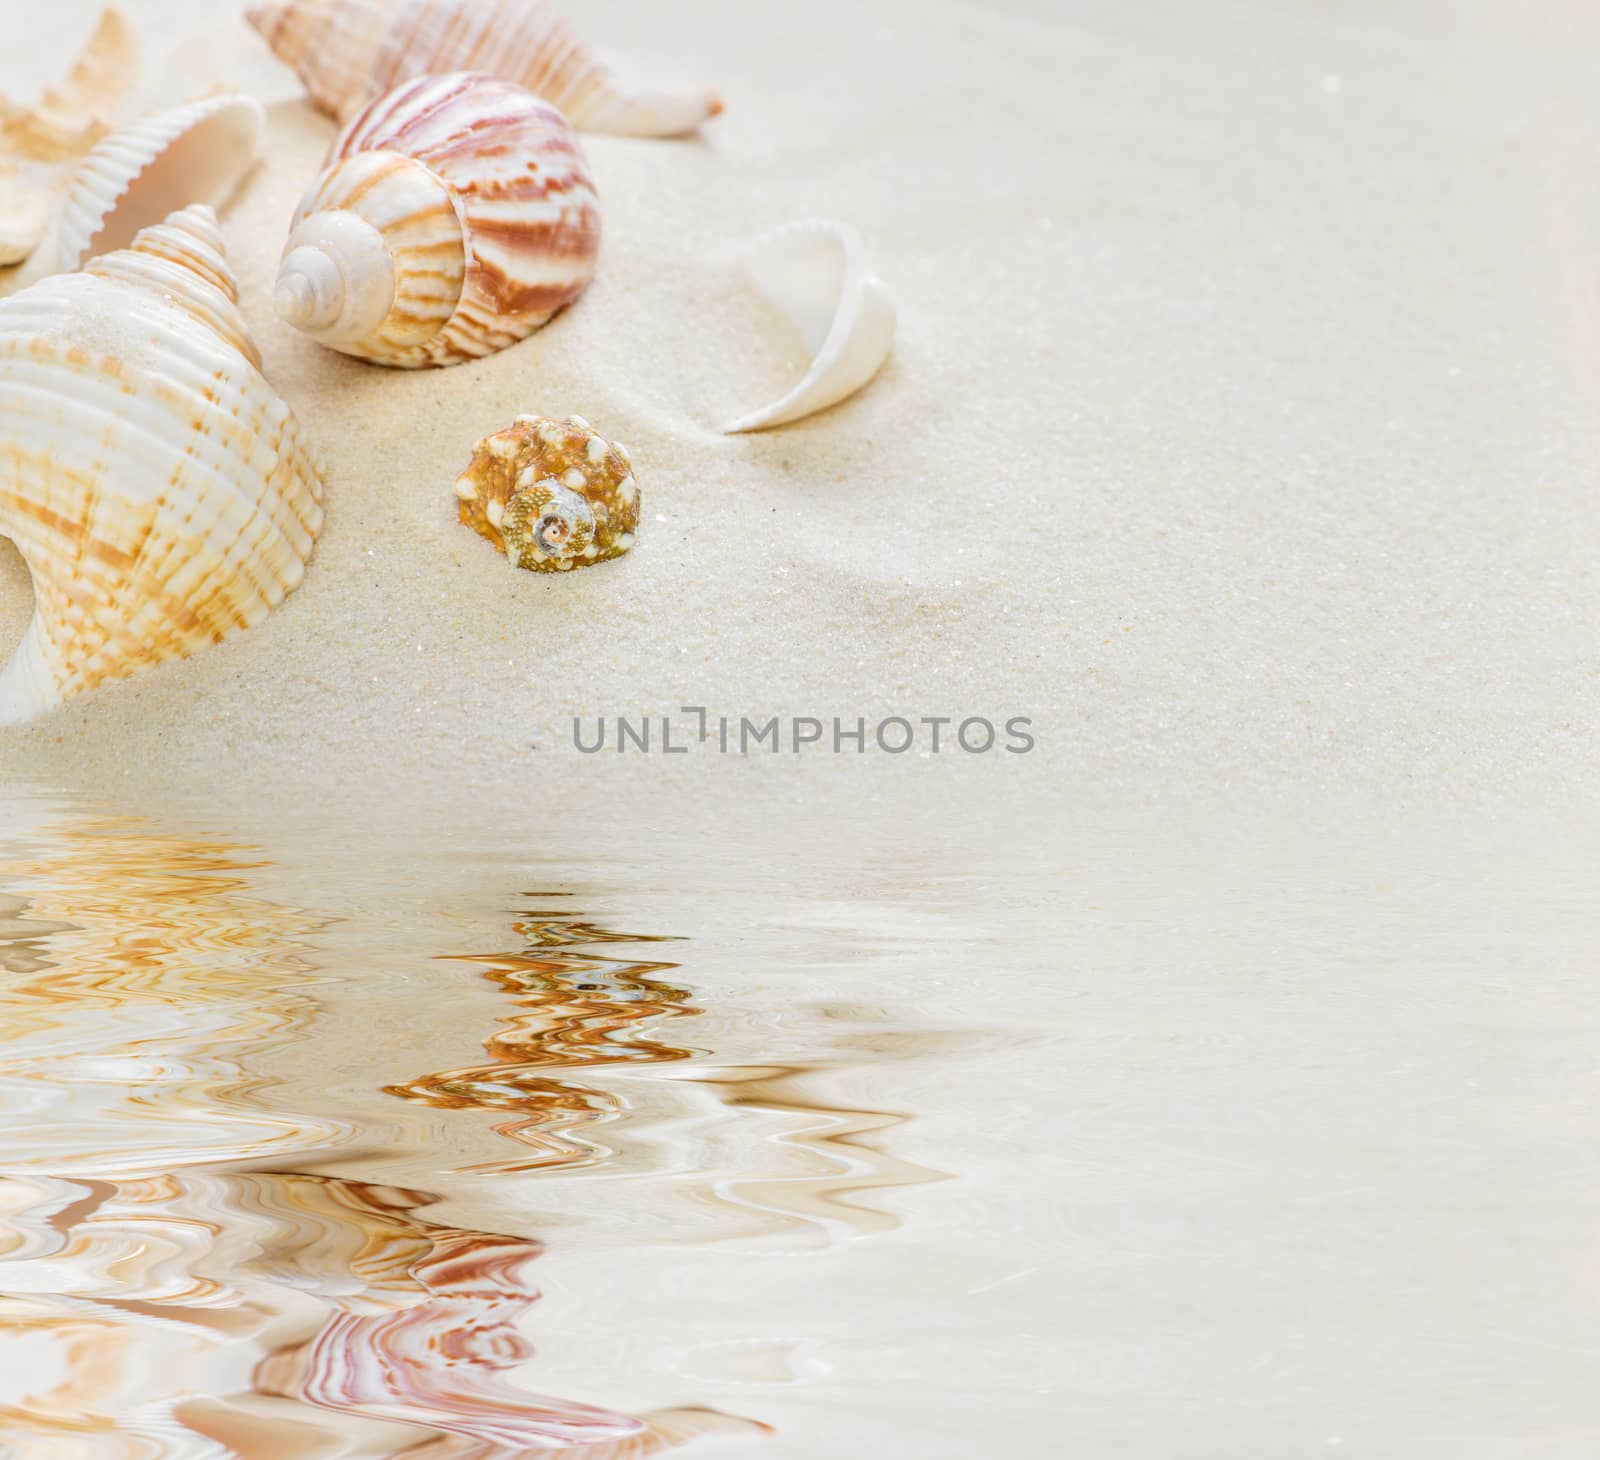 Several clams  on the background of sea sand reflected in the water surface with small waves